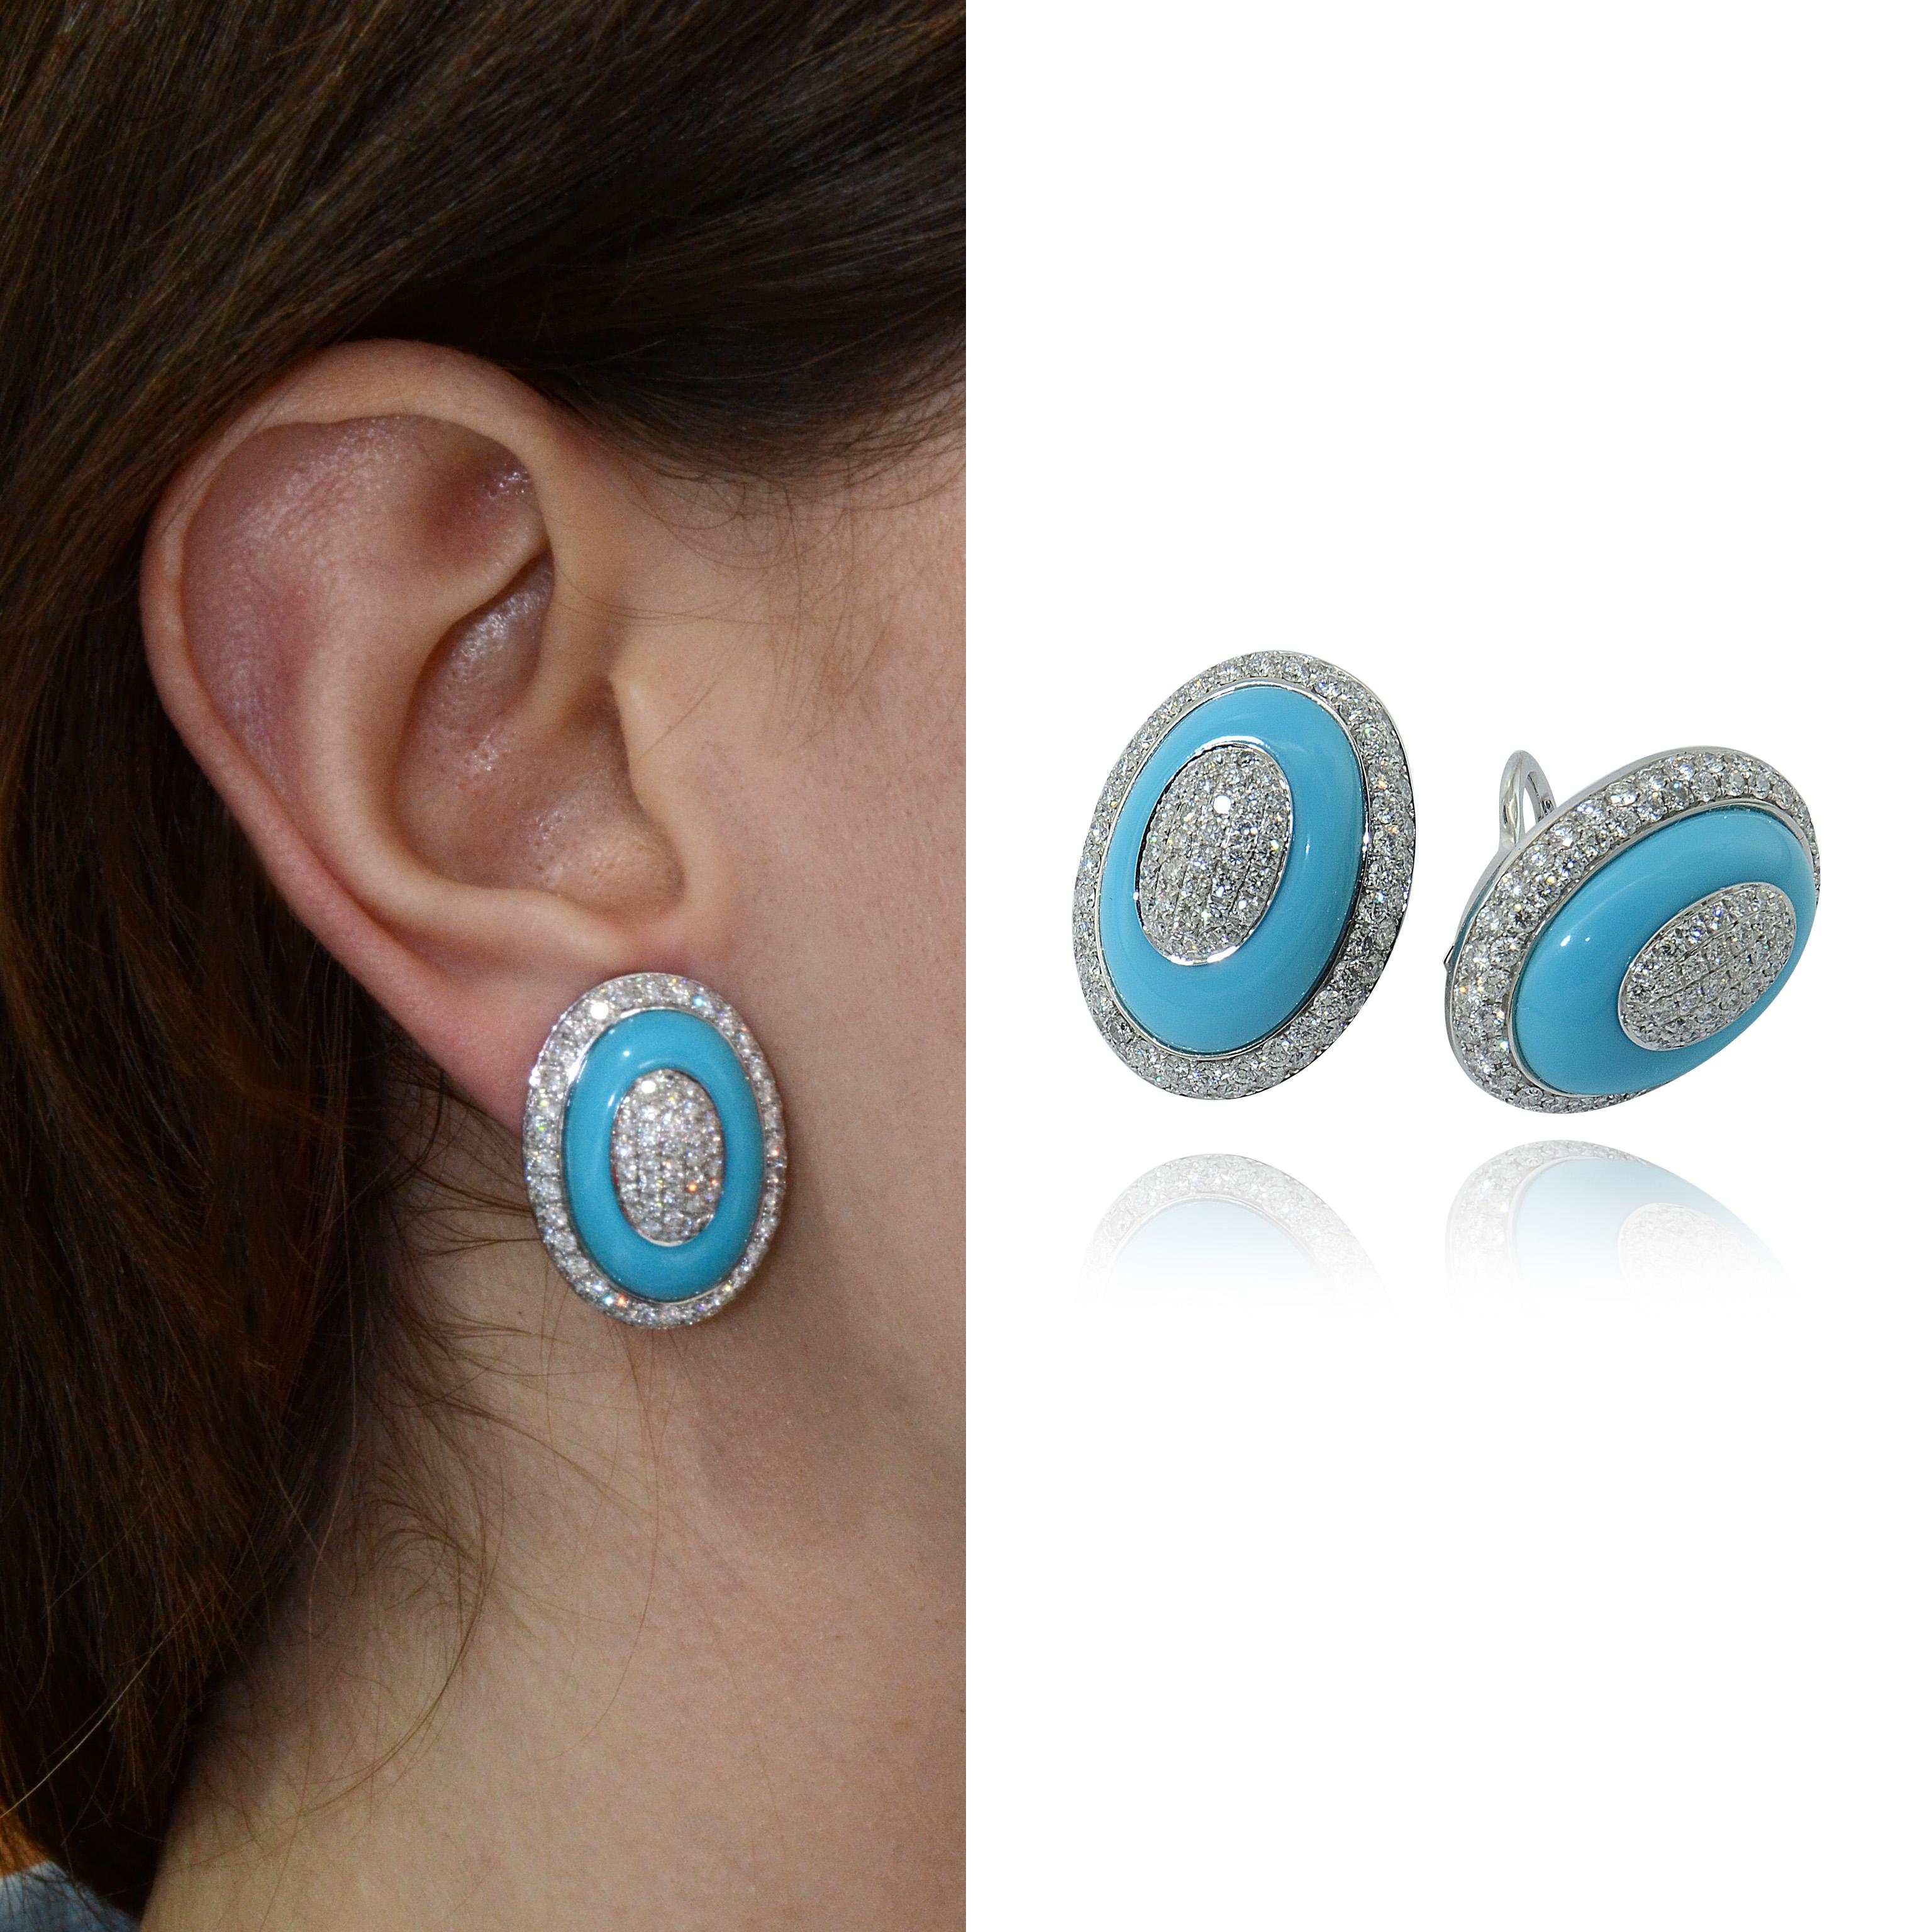 Handcrafted in Margherita Burgener workshop, Valenza, Italy, in 18K white gold, featuring a this layer of natural turquoise of excellent quality and color.  
The ear clips have collapsible fitting and clips. Though they are suitable for no pierced